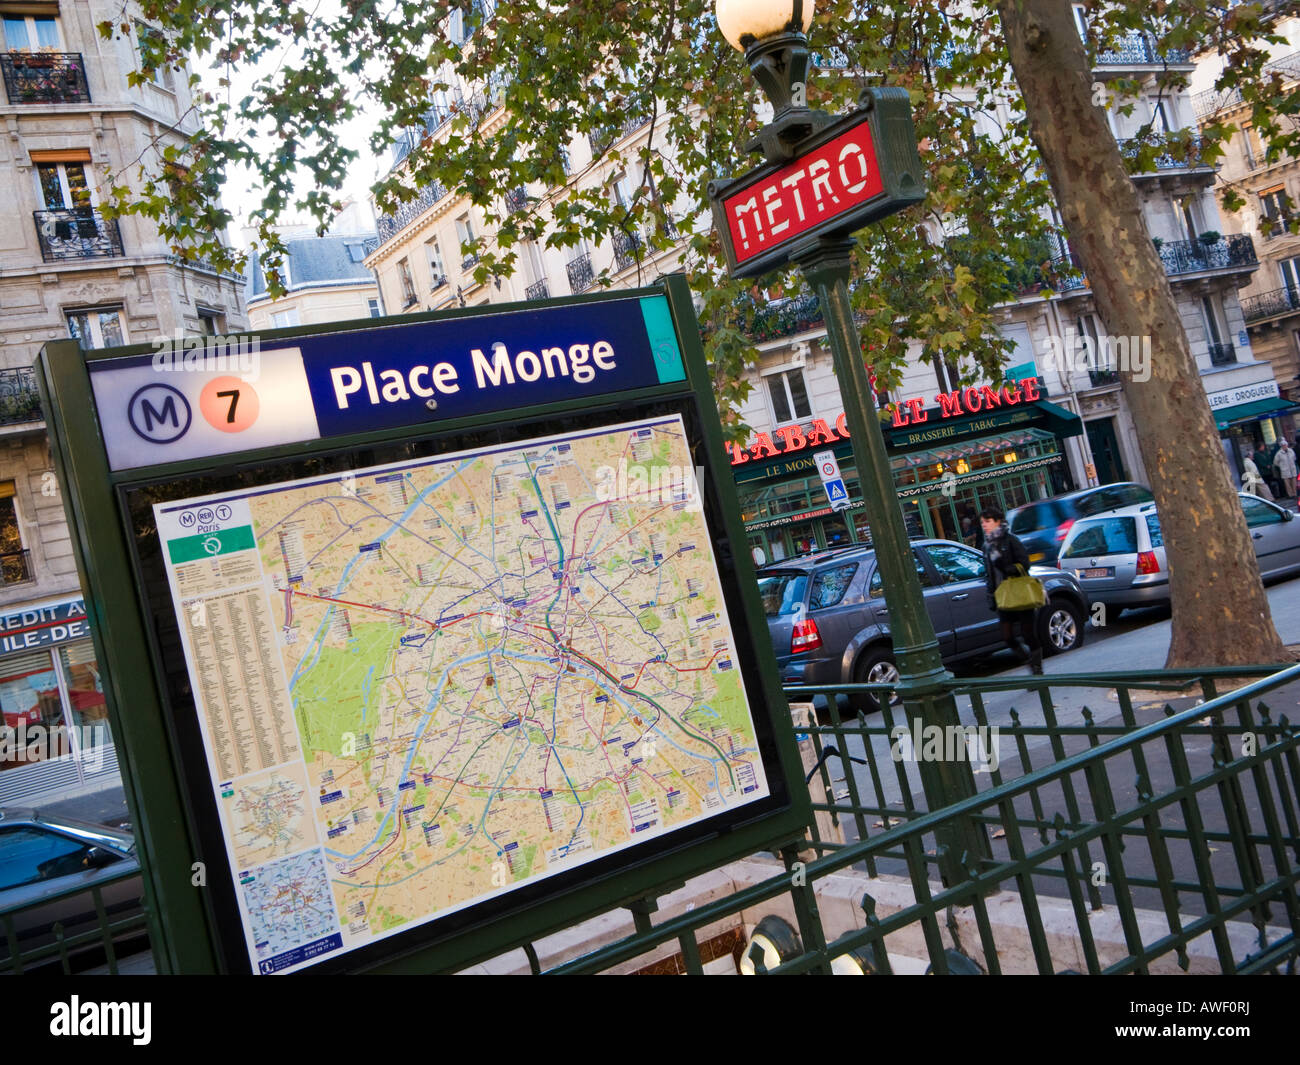 Entrance to Place Monge Paris metro station with sign and map Stock Photo